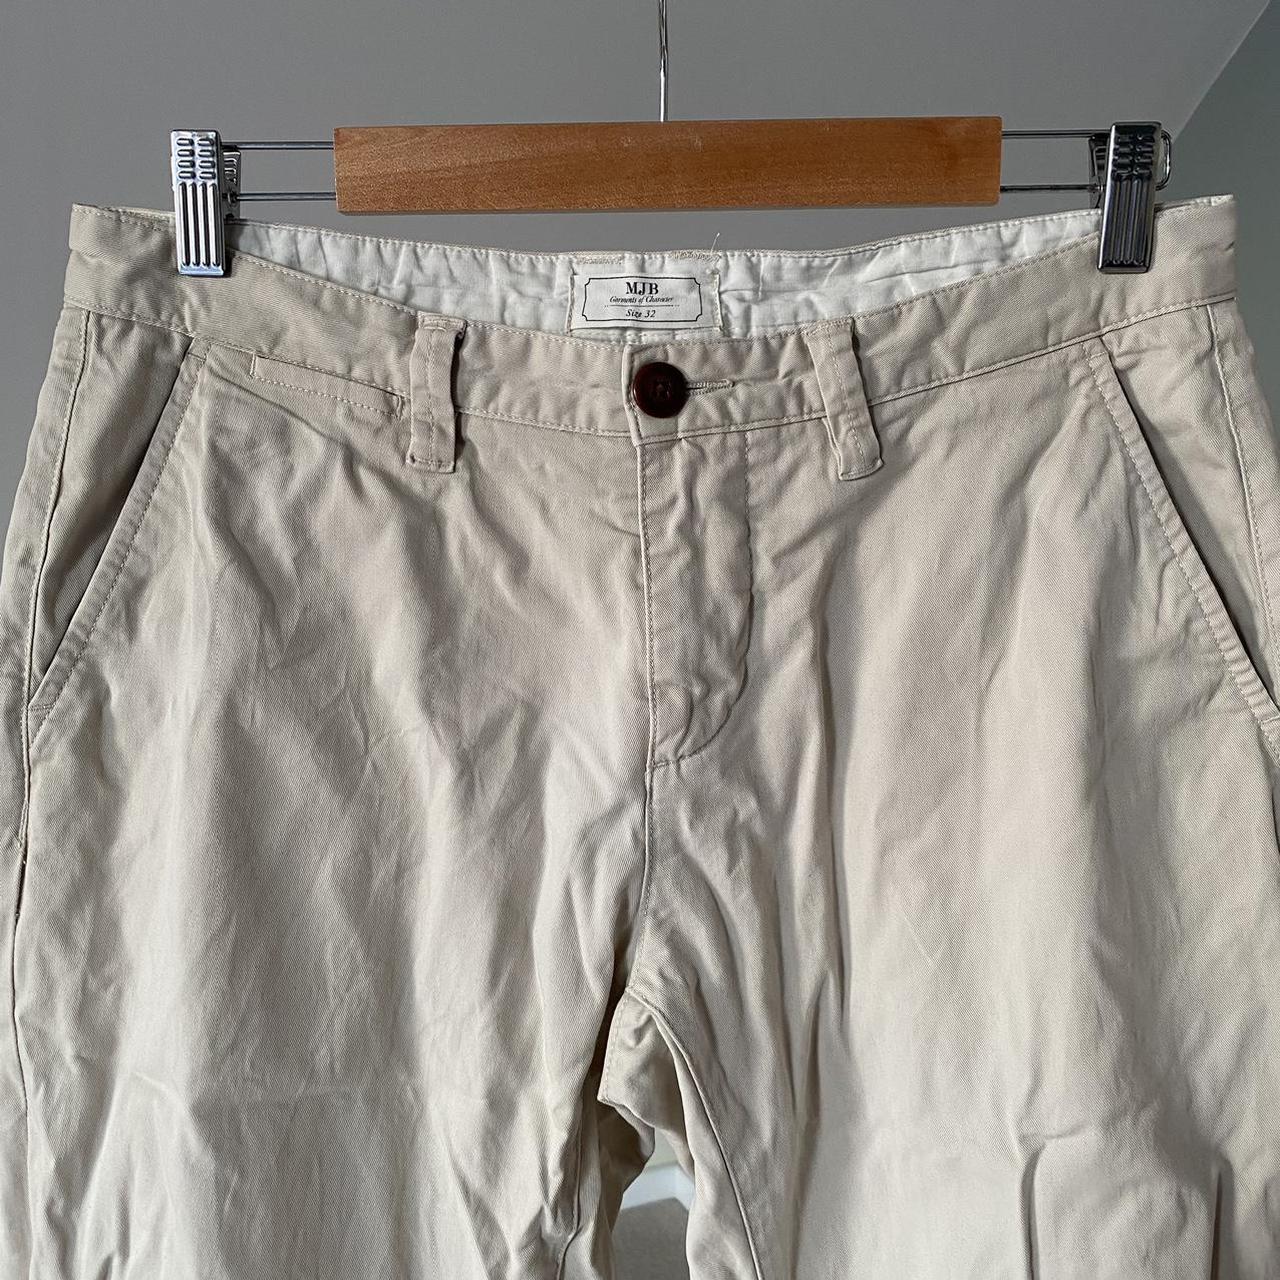 M.J. BALE - McQueen Chino in Feather ️ RRP... - Depop